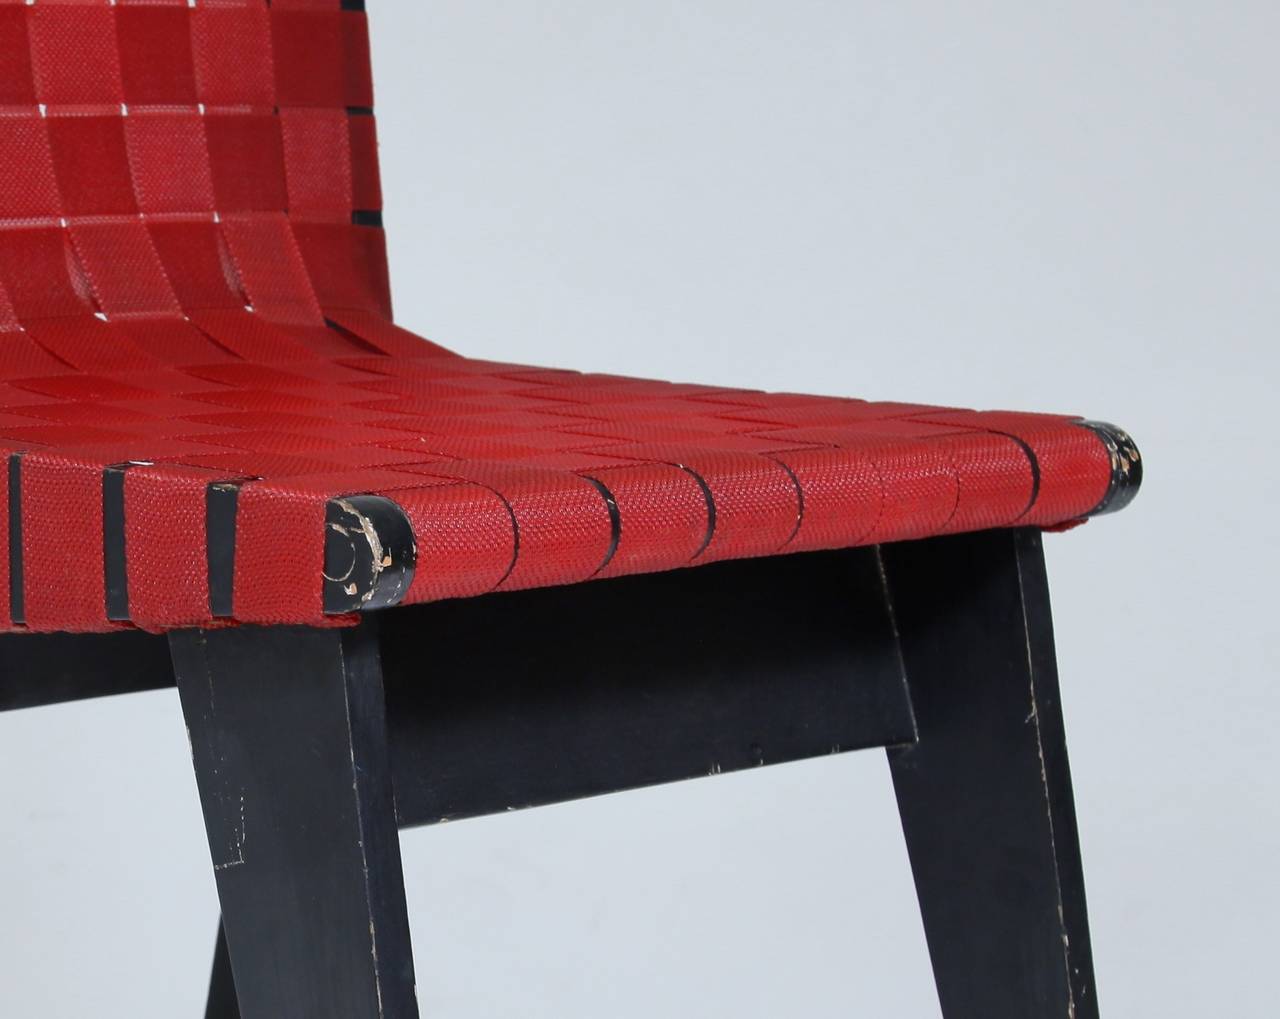 Mid-Century Modern Klaus Grabe Chair with Red Webbing, USA, 1950s For Sale